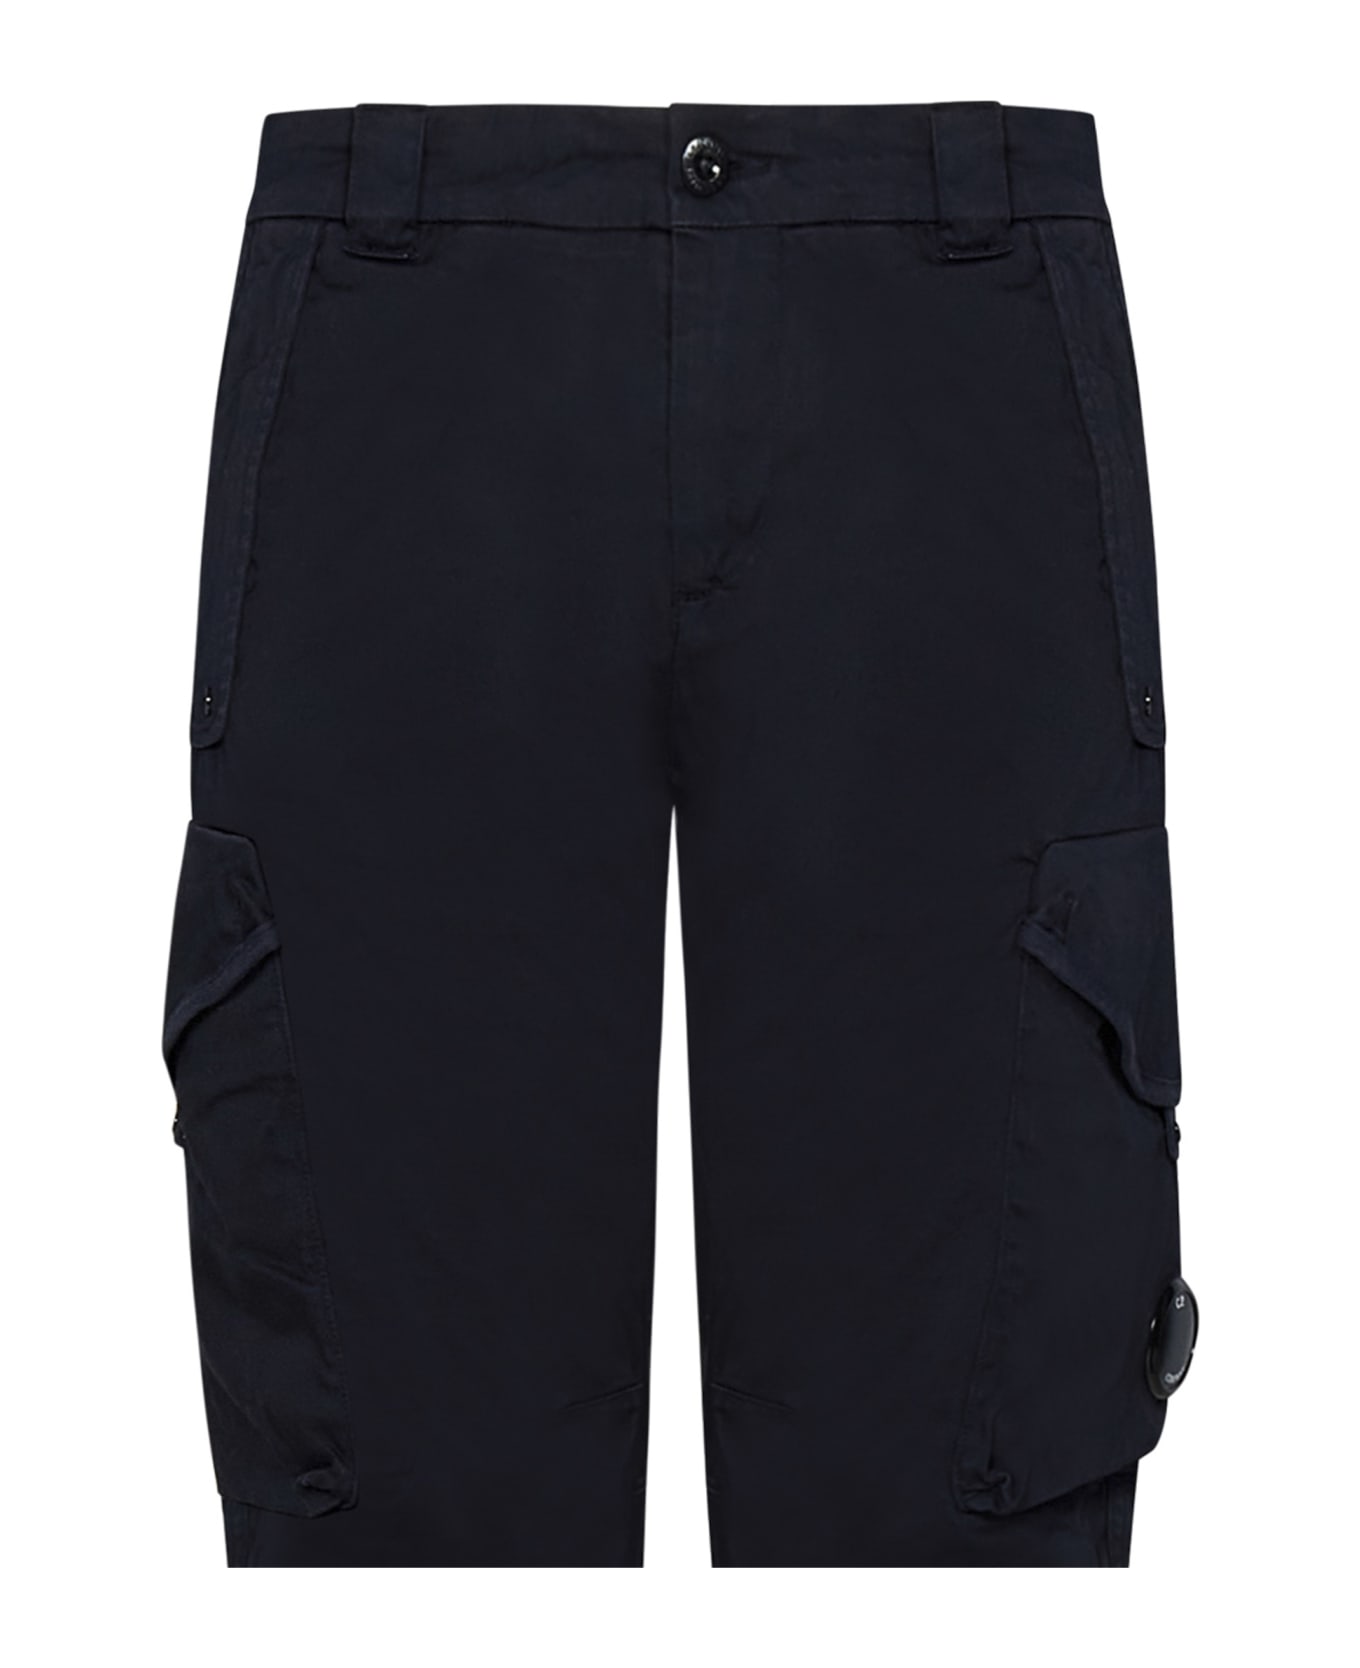 C.P. Company Trousers - TOTAL ECLIPSE